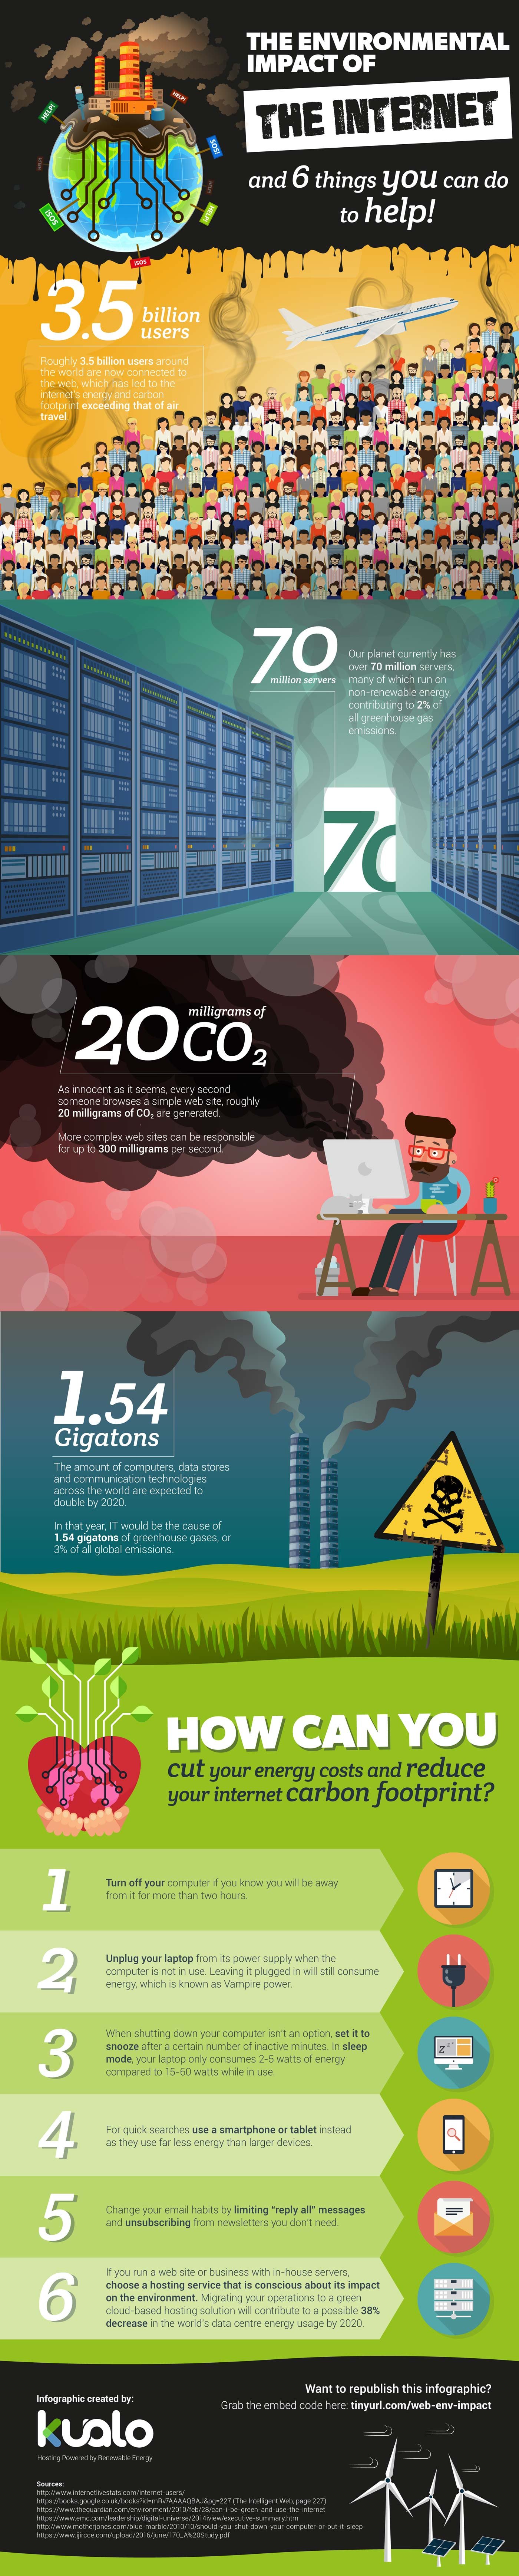 Learn more about how to reduce internet pollution